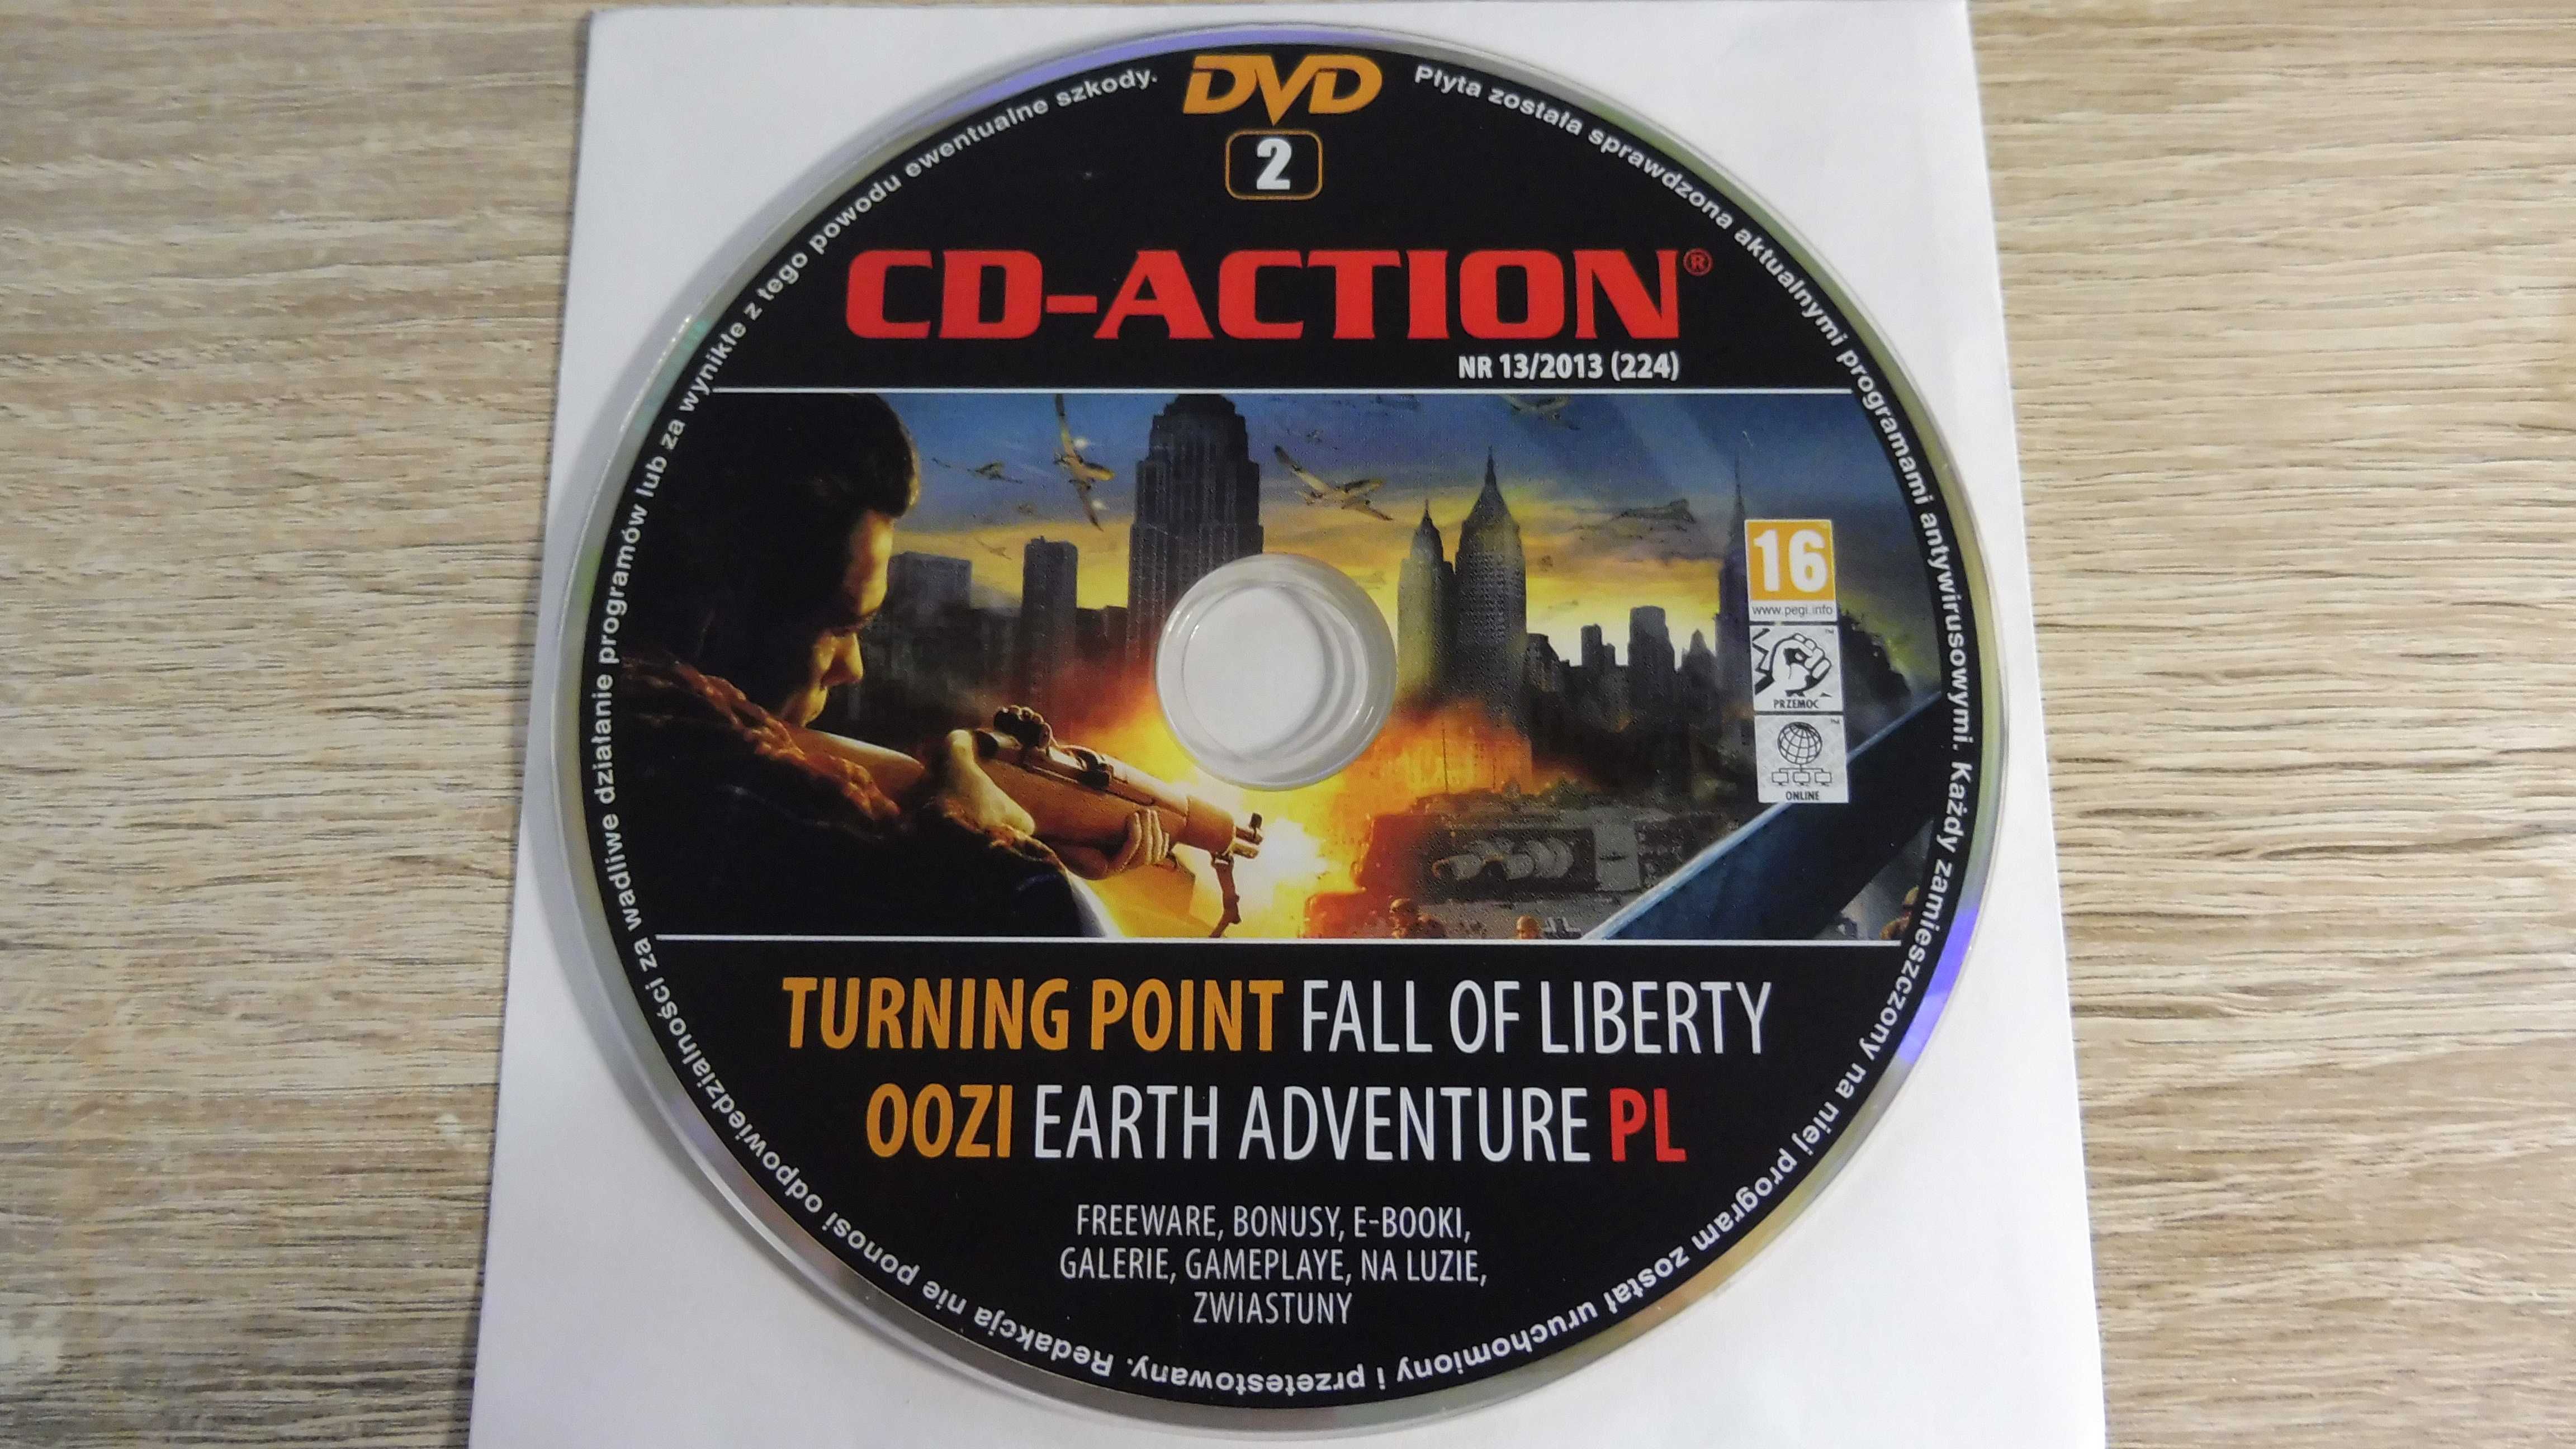 CD Action 13/2013 (224) - DVD 2 - Turning Point Fall Of Liberty